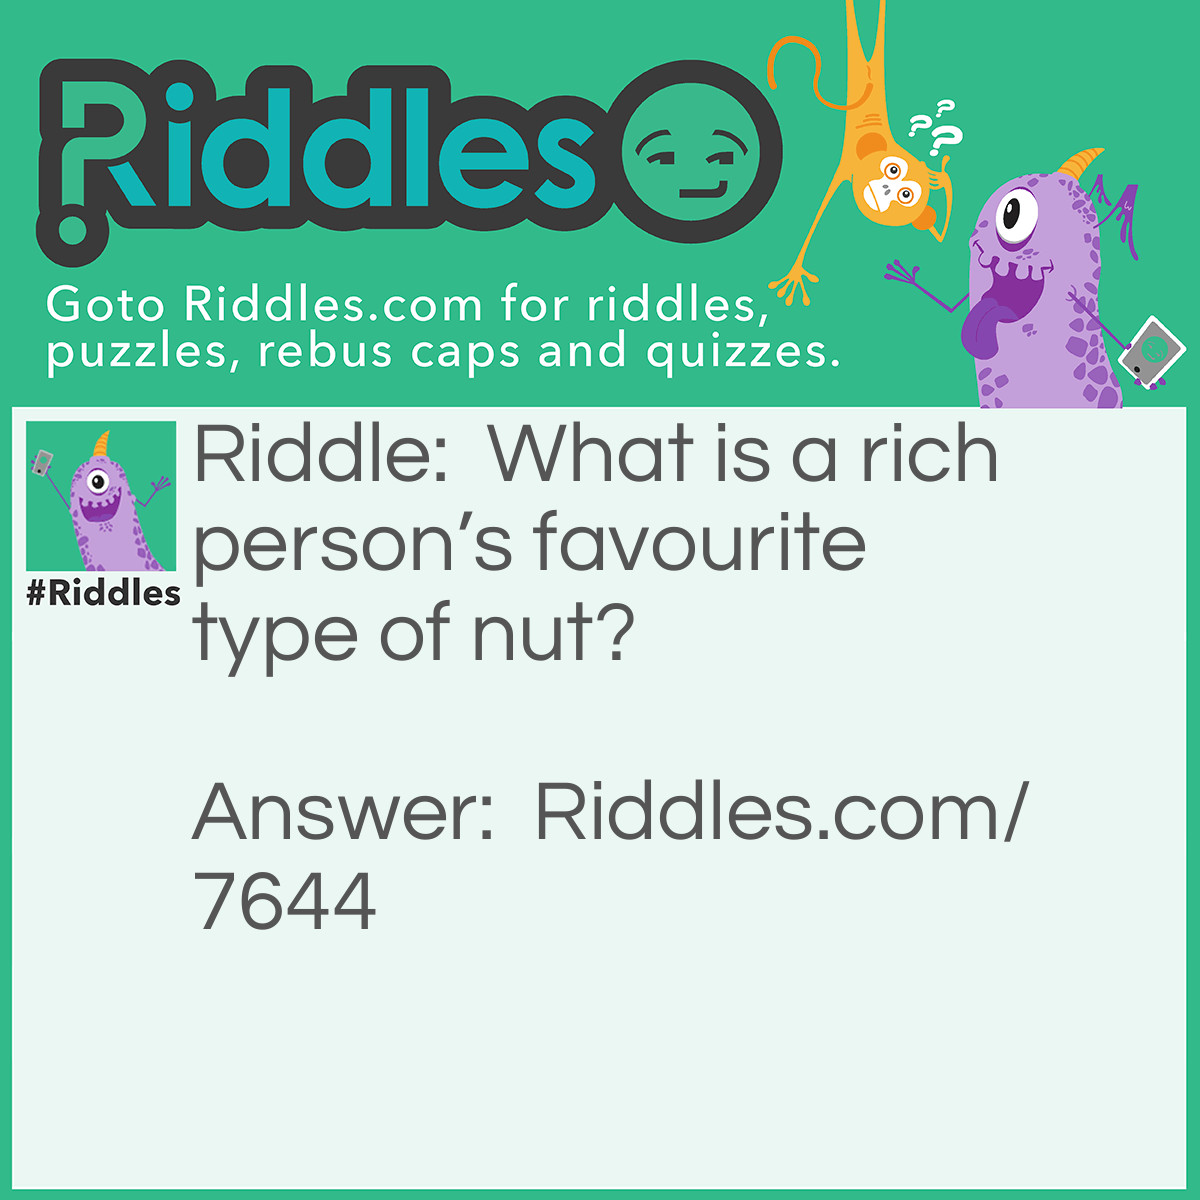 Riddle: What is a rich person's favourite type of nut? Answer: A cashew!